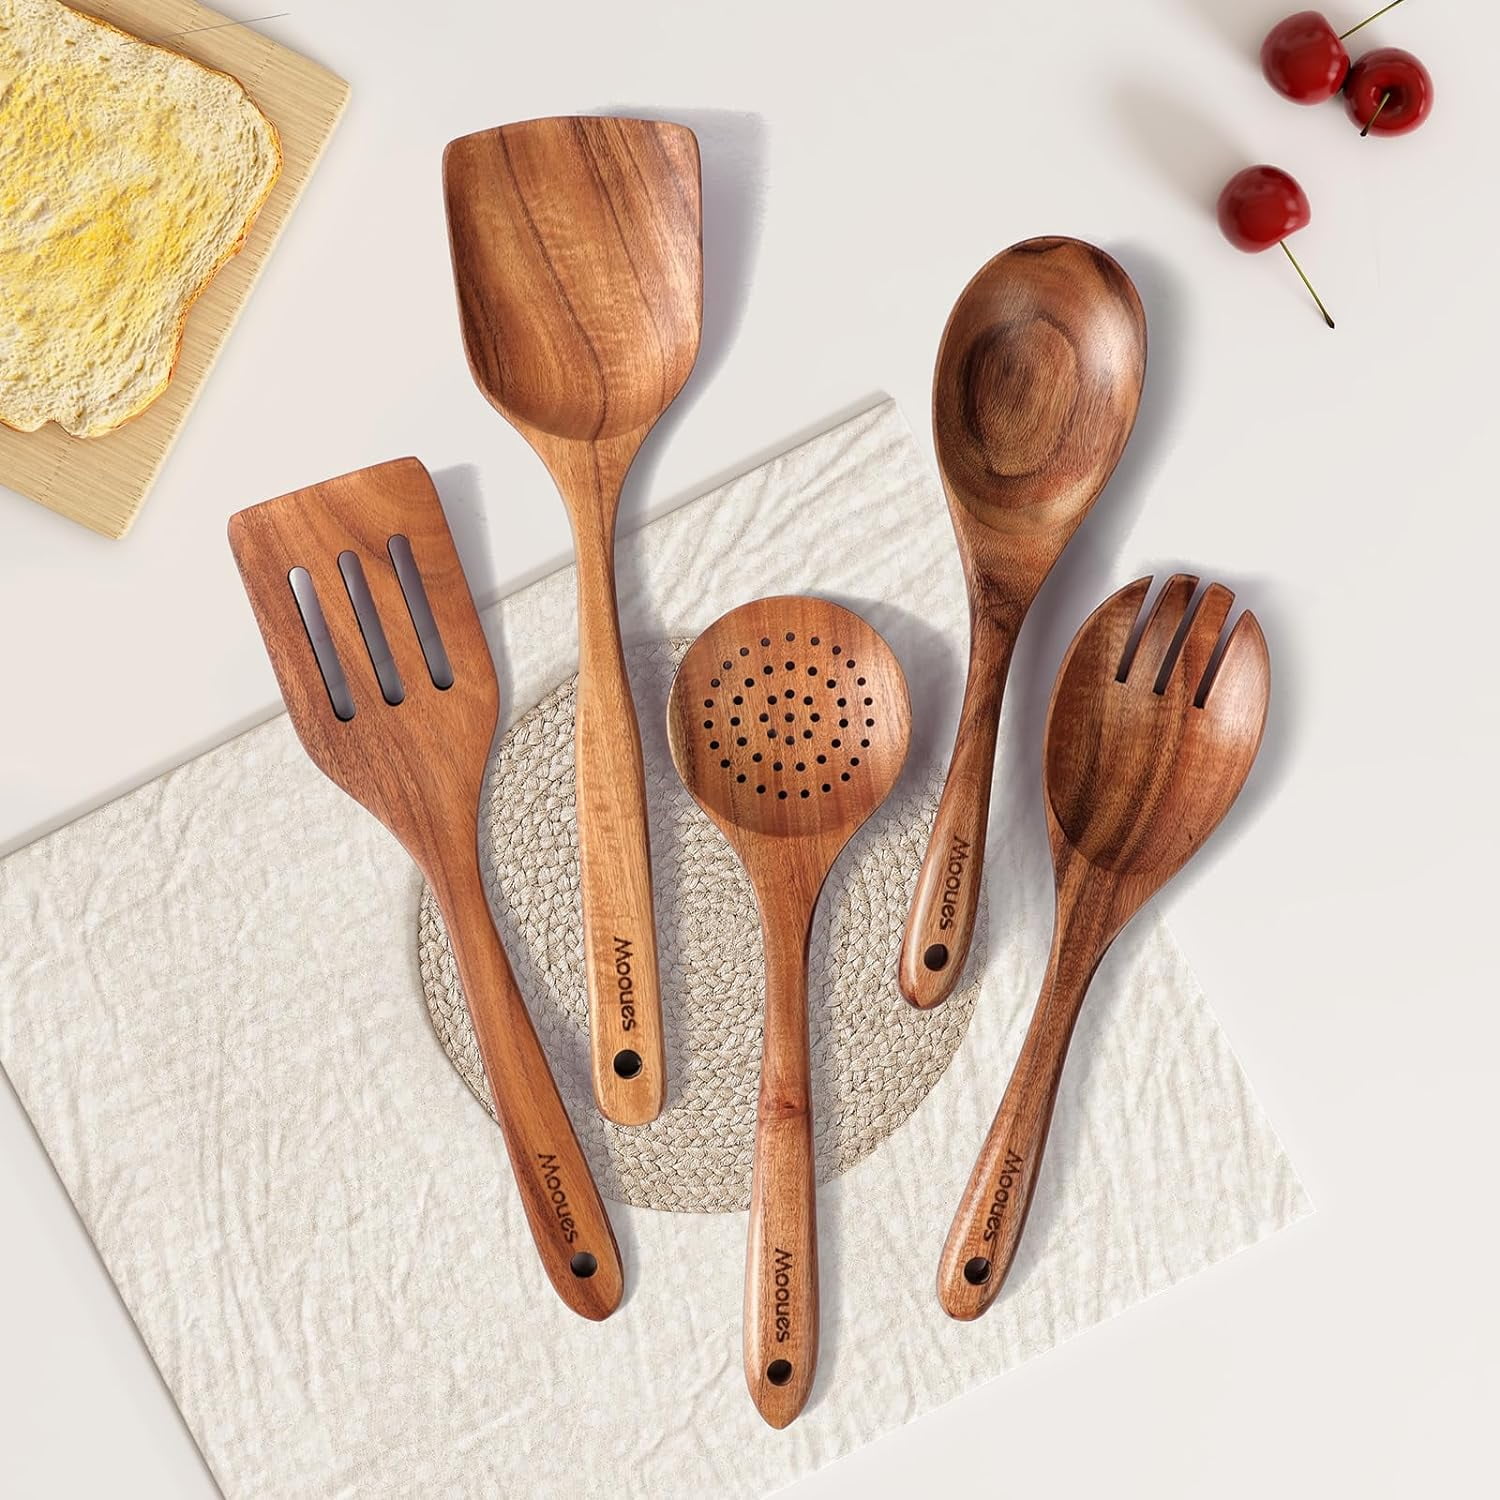 TKINGOP 9PCS Wooden Spoons for Cooking Handmade Natural Teak Wooden  Utensils for Cooking with Holder & Spoon Rest Comfortable Grip Kitchen  Utensils